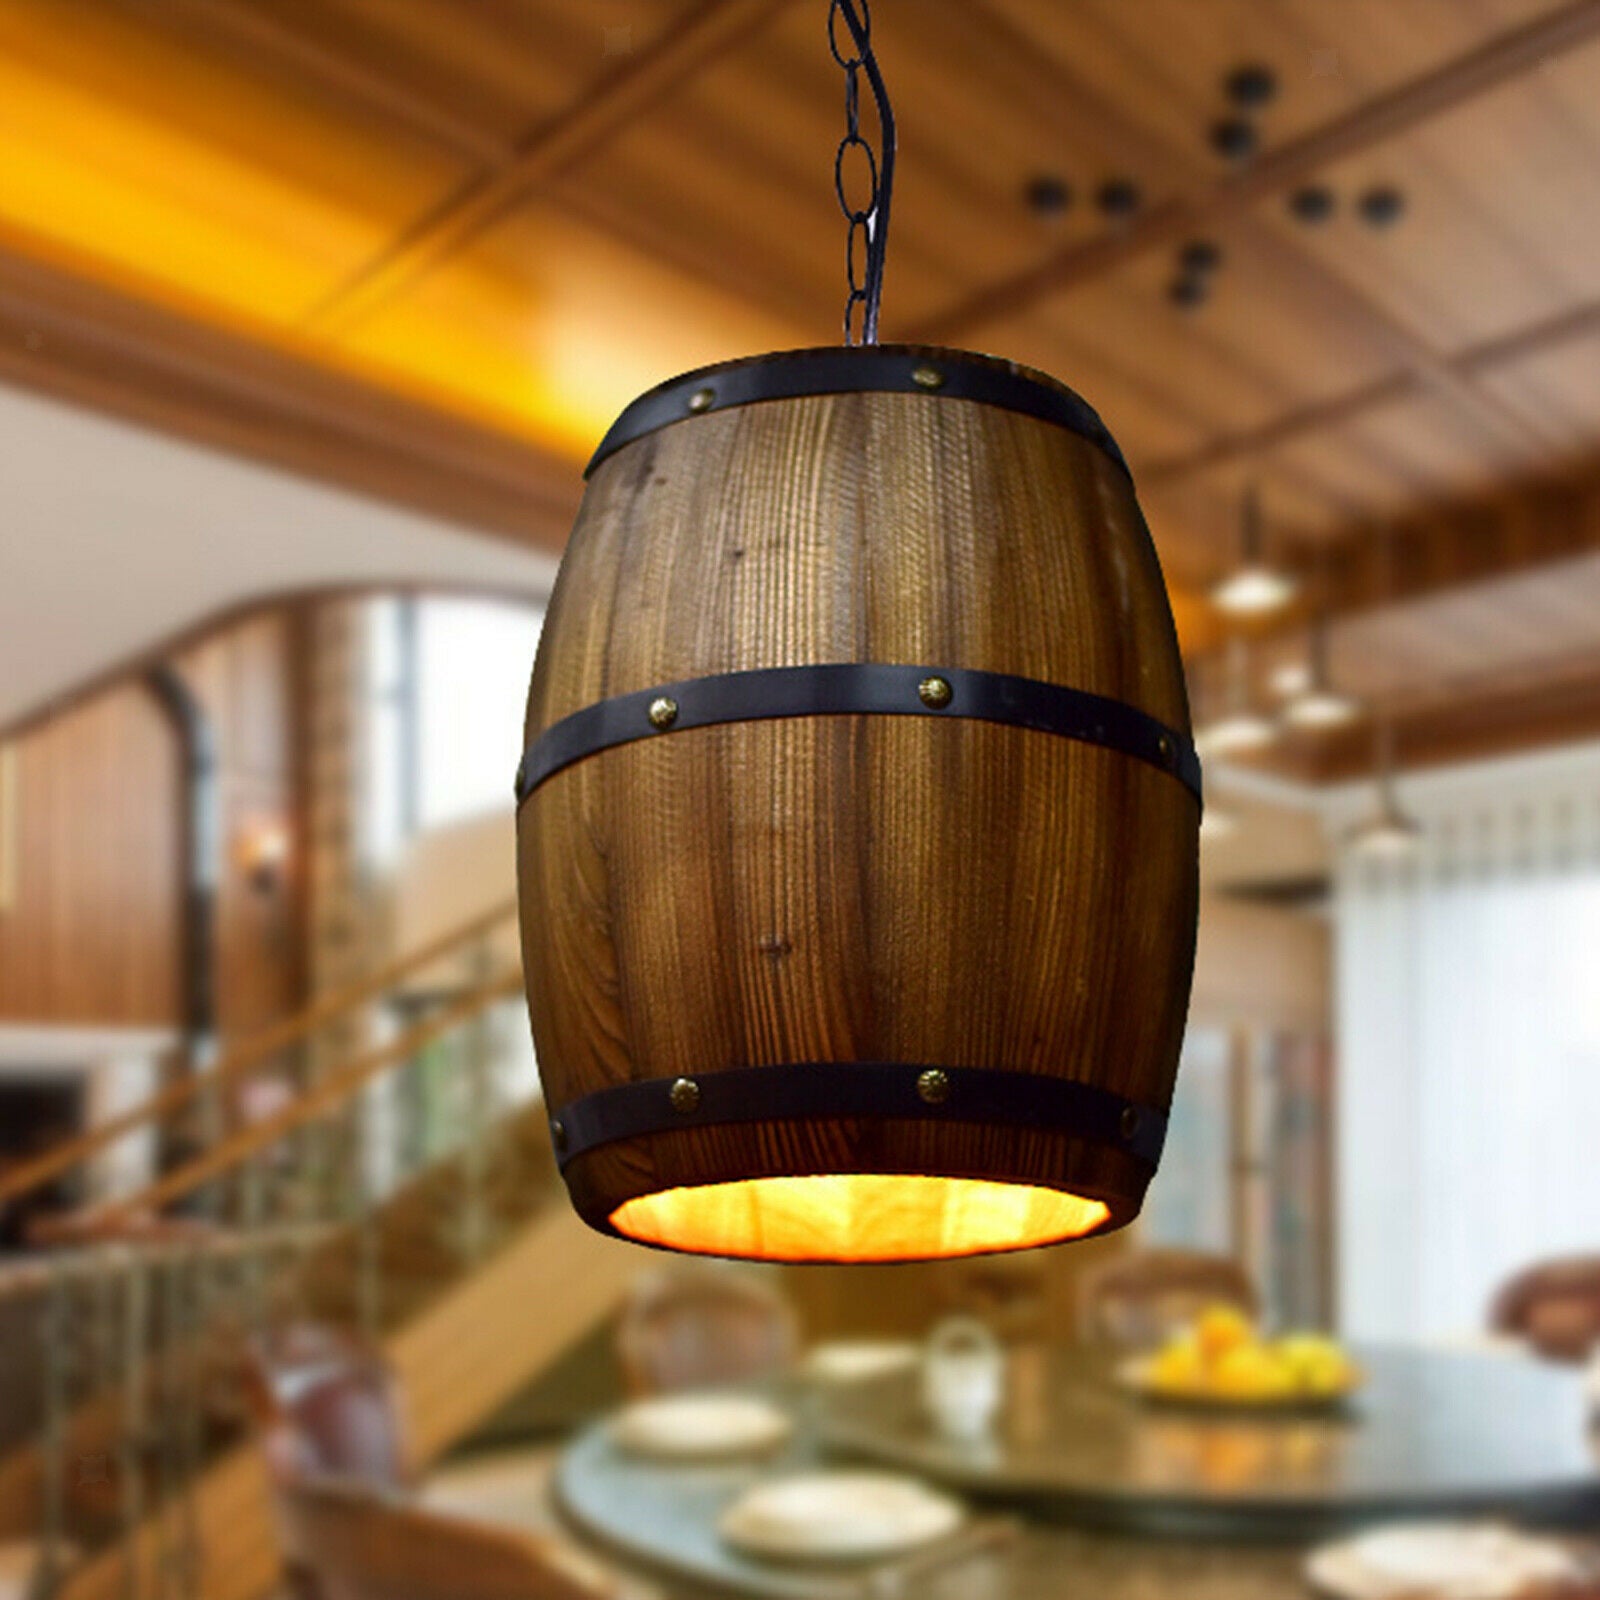 Wooden Lamp Shade Bar Dining Room Barrel Shape Ceiling Lamp Cover Removable